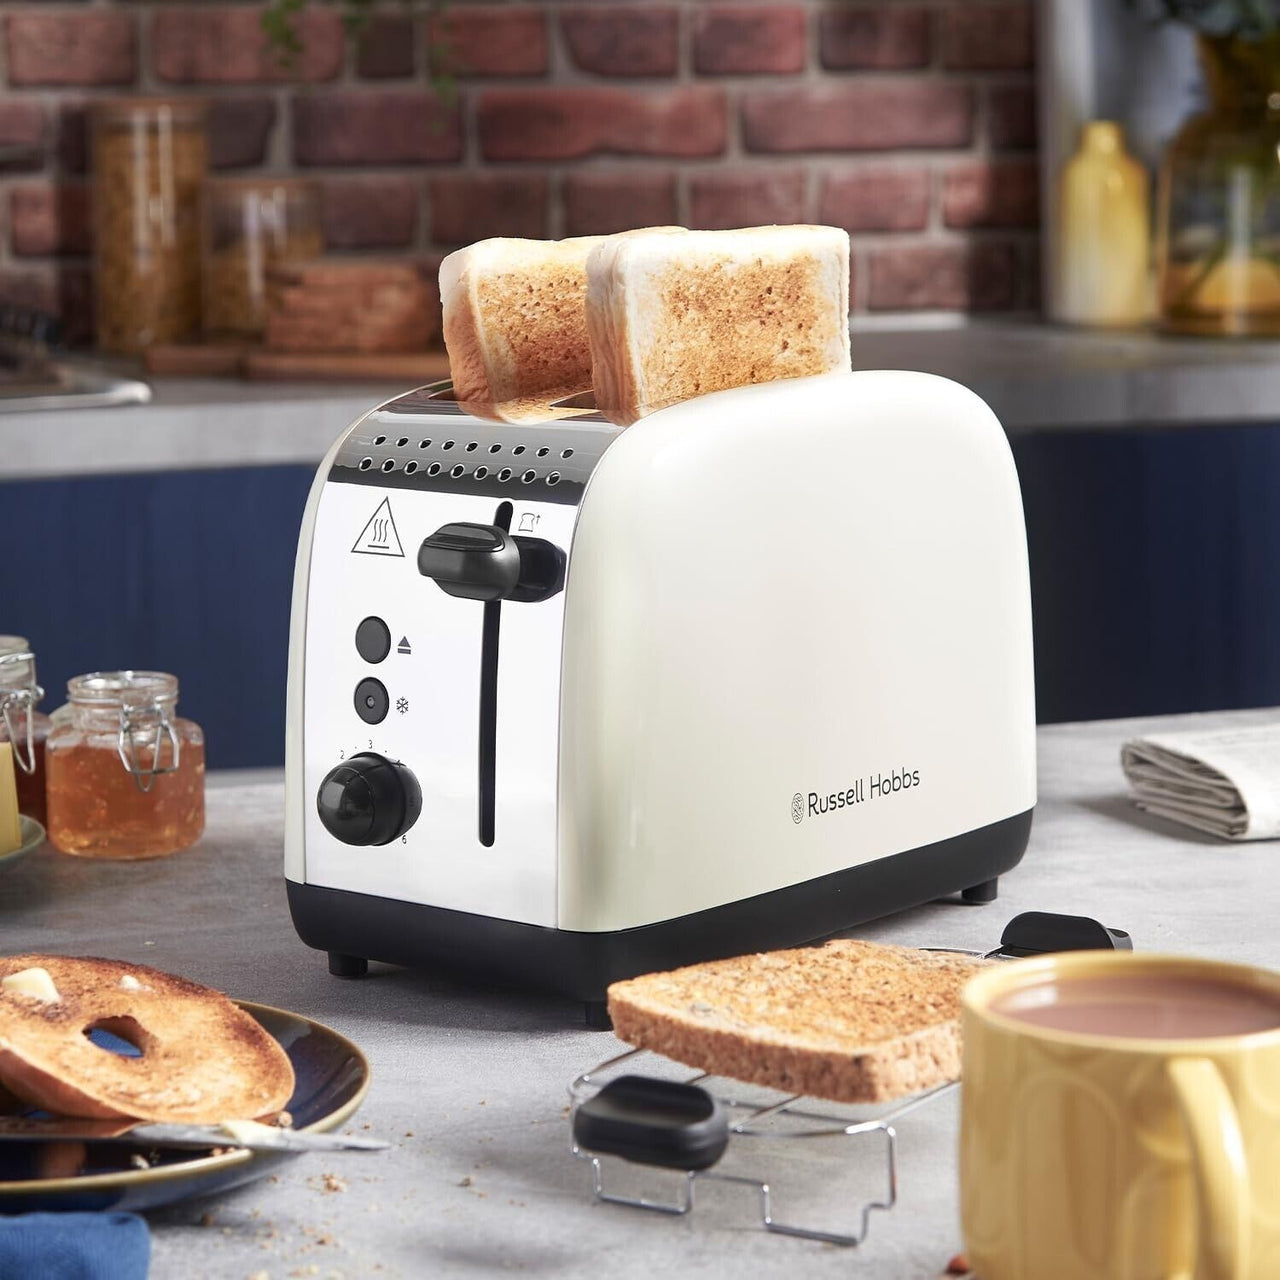 Russell Hobbs Colours Plus 1.7L Kettle, 2 Slice Toaster & 700W Manual Microwave RHMM701C Matching Set in Cream